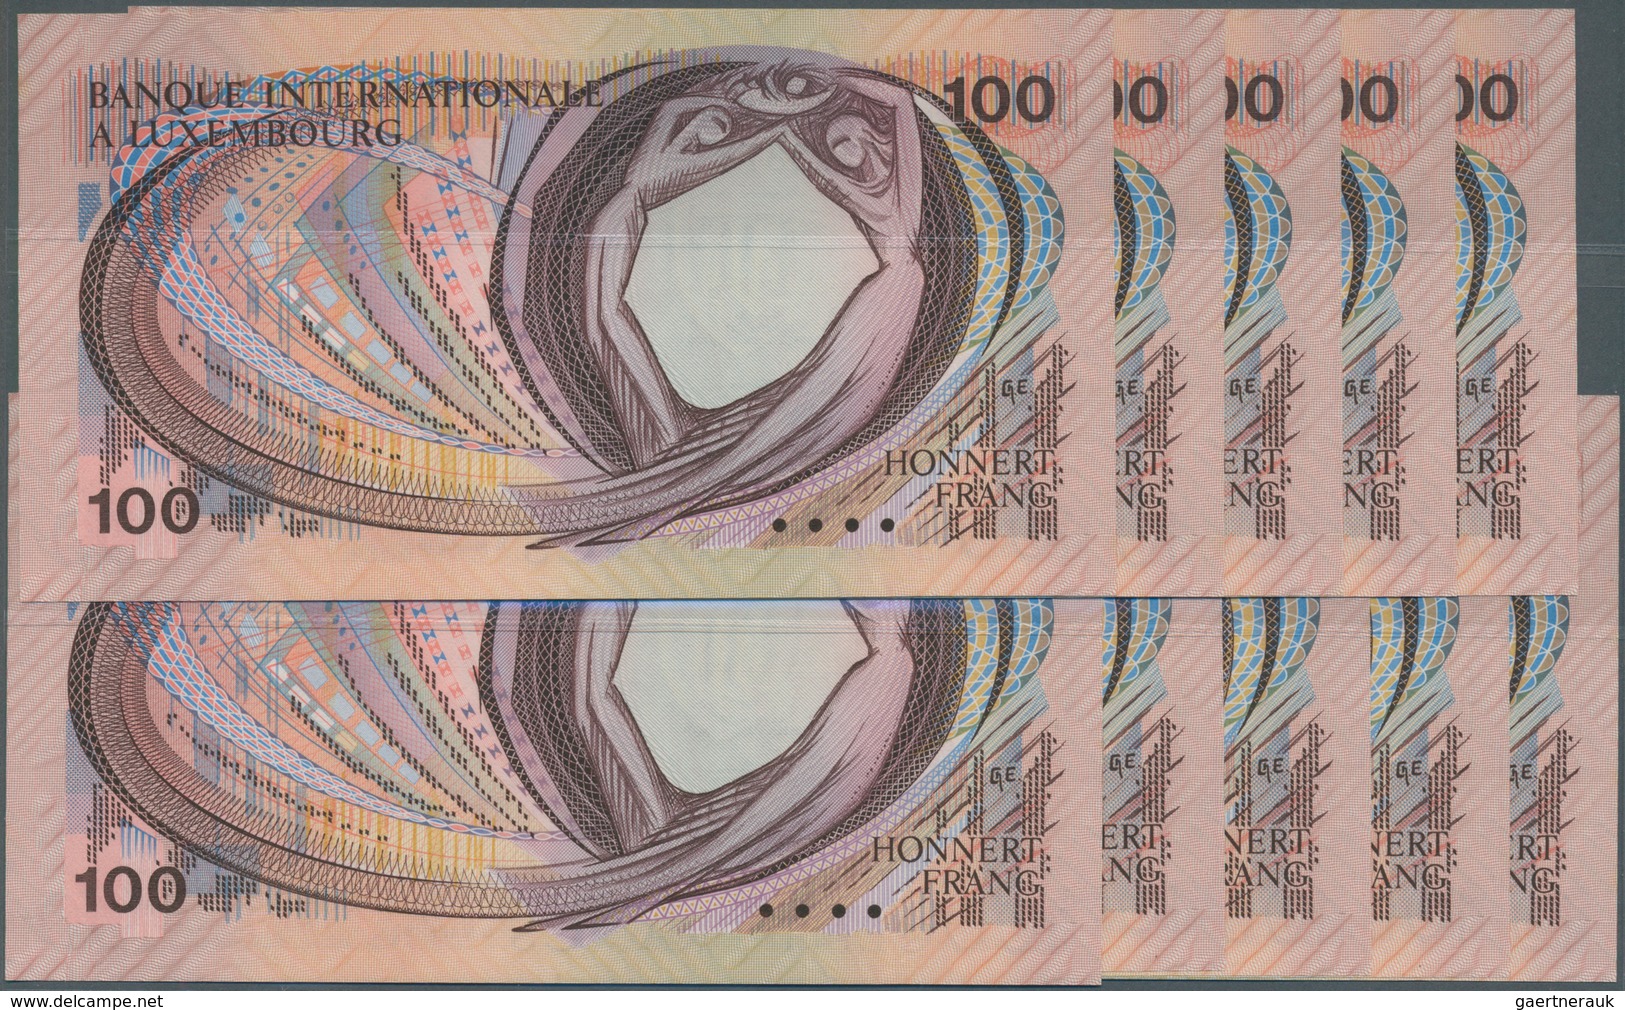 01935 Luxembourg: Set Of 10 CONSECUTIVE Notes Of 100 Francs 1981 P. 14a, All In Condition: UNC. (10 Pcs Co - Luxemburgo